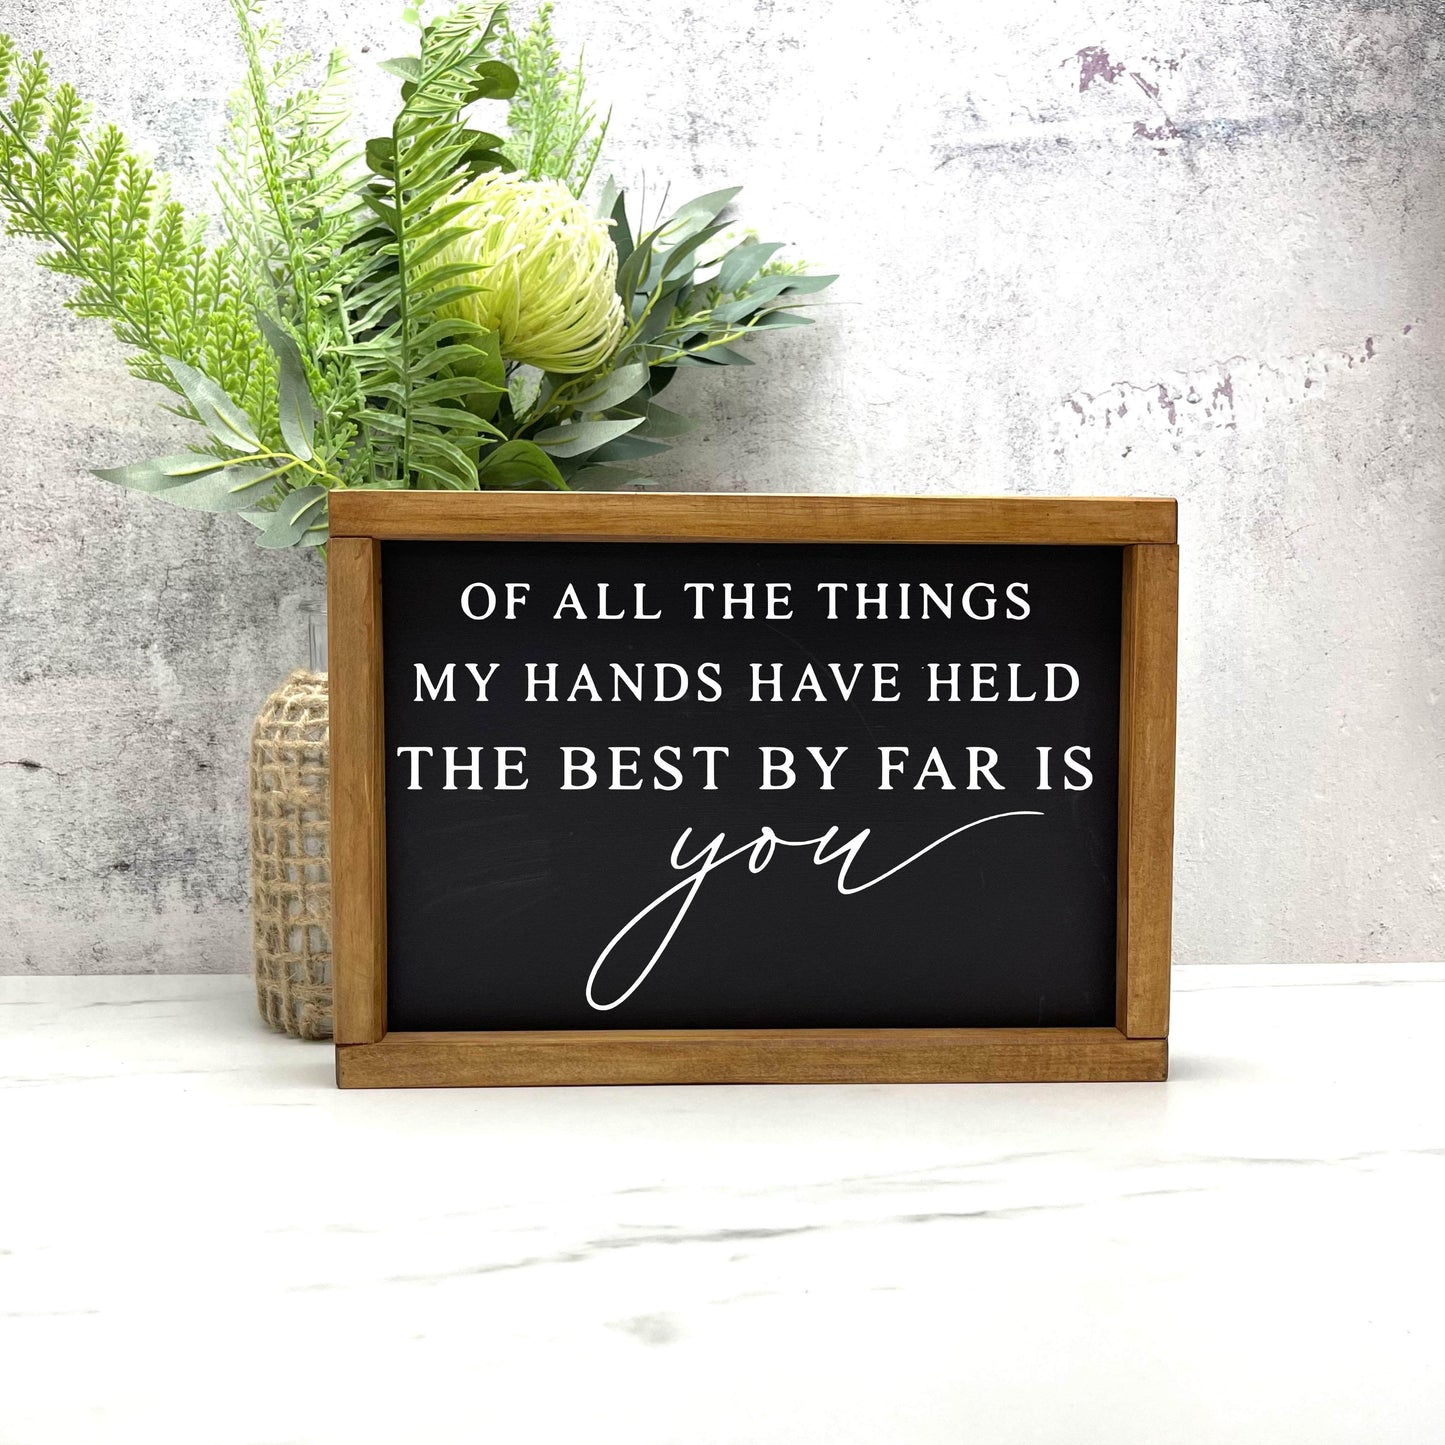 Of all the things framed wood sign, love sign, couples gift sign, quote sign, home decor